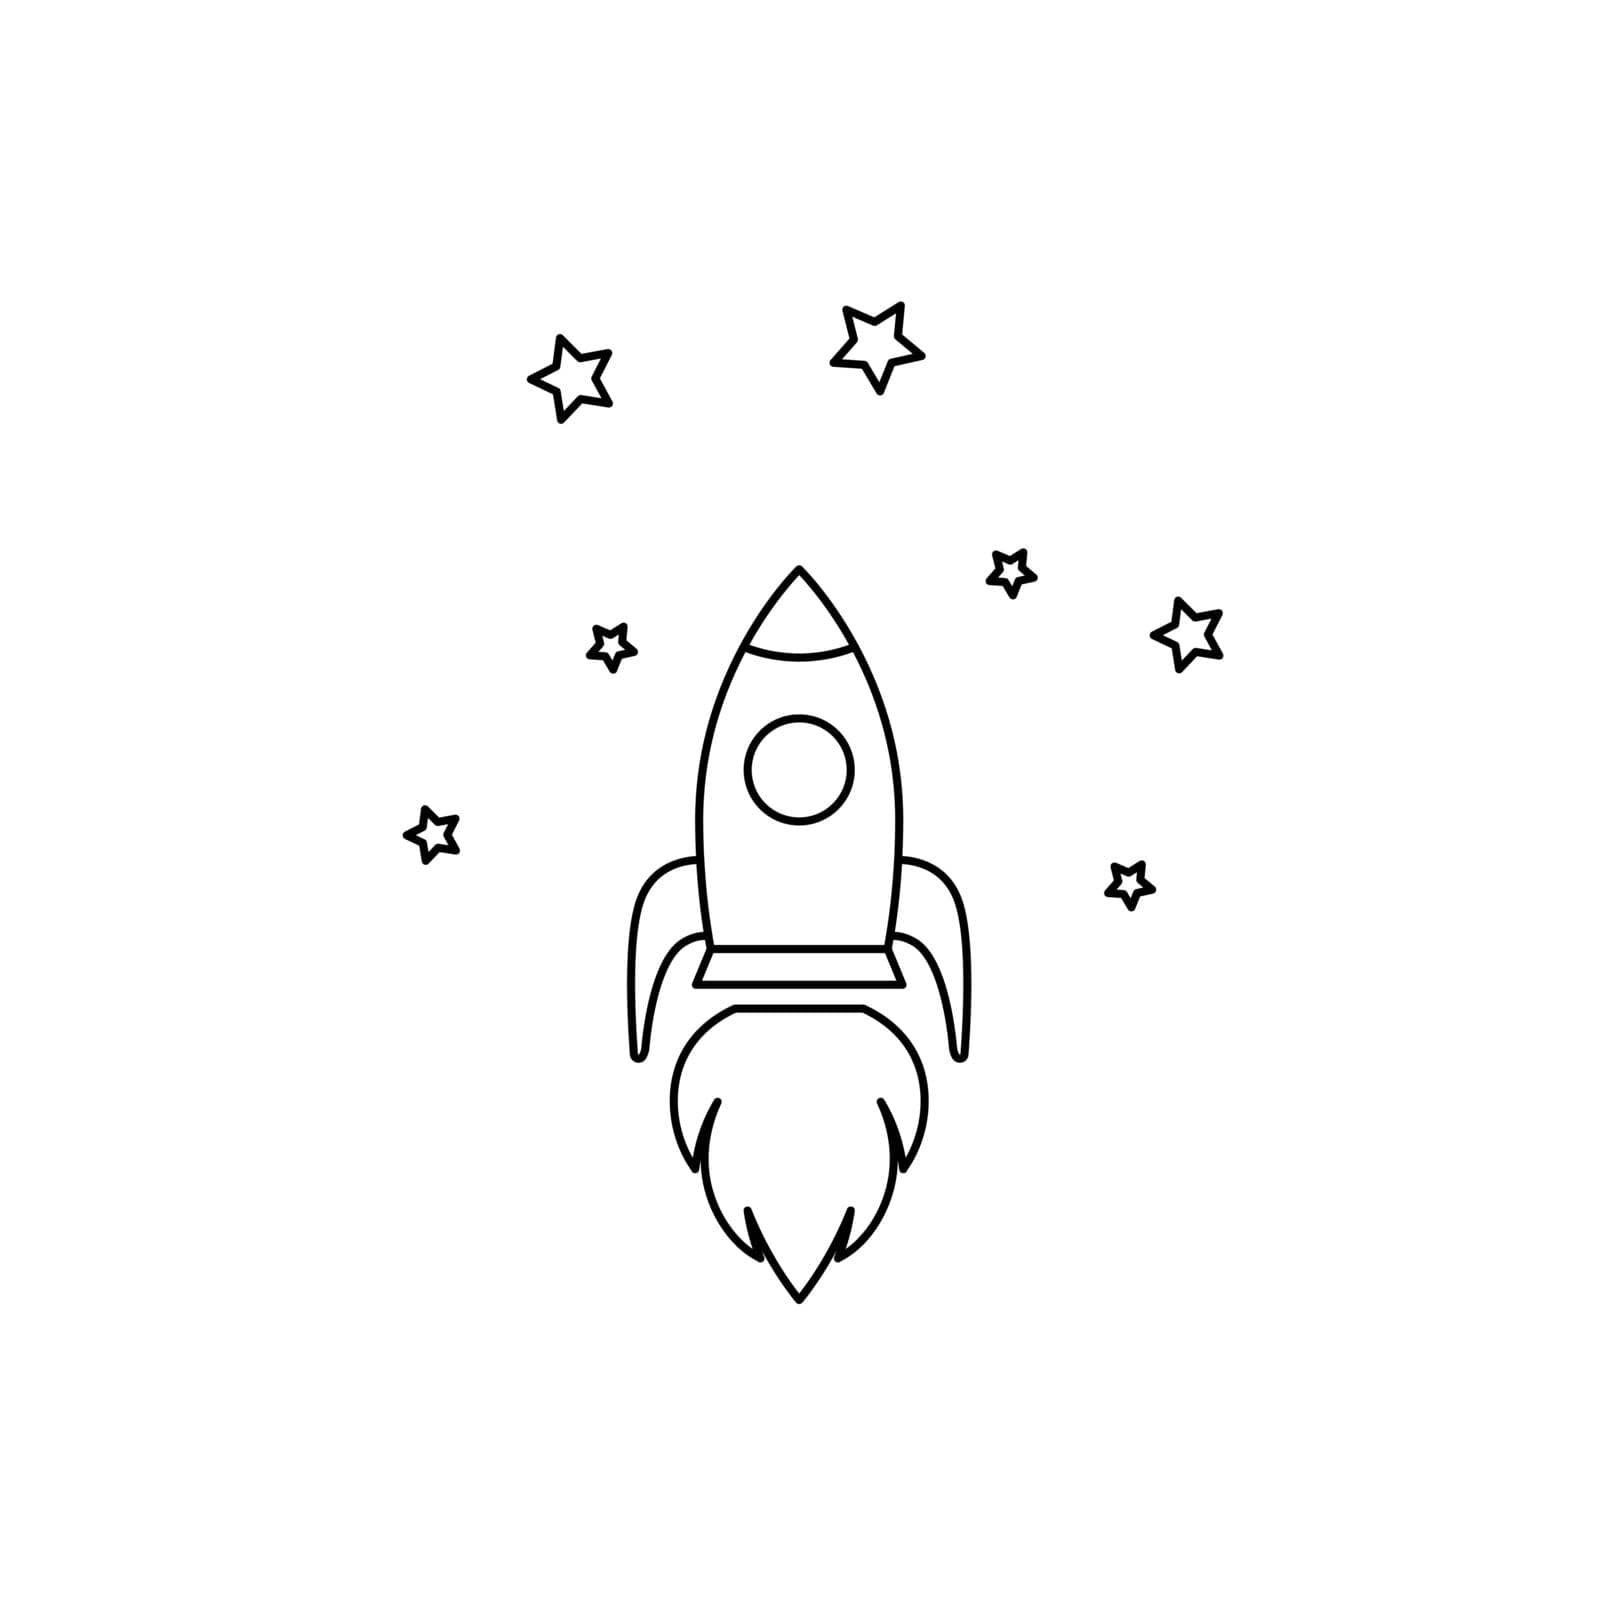 Rocket icon. Rocket ship in linear style. Vector illustration. Startup concept black icon isolated